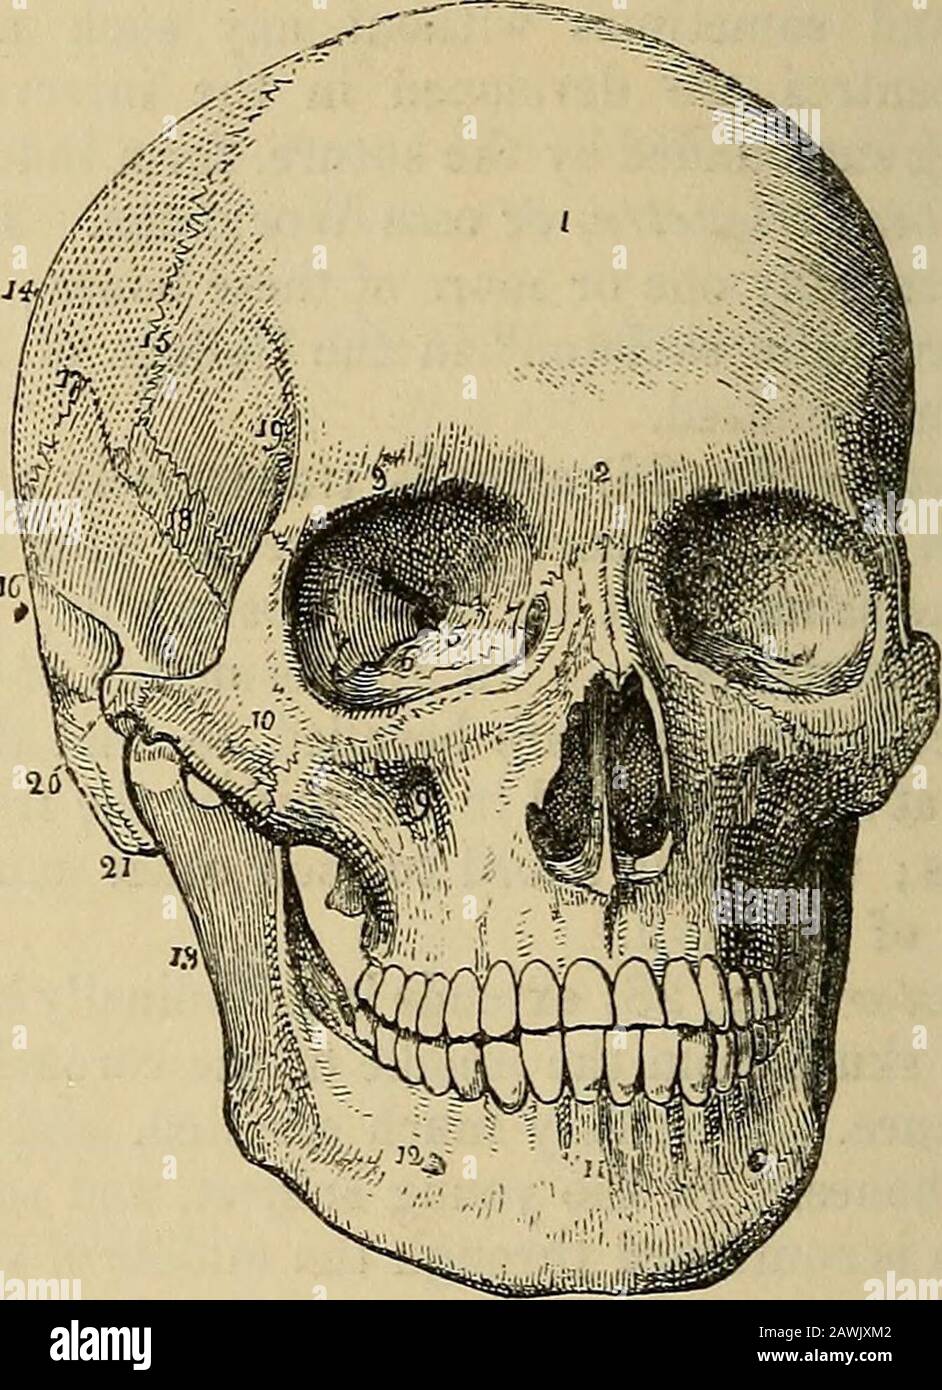 The anatomist's vade mecum : a system of human anatomy . f additamentum suturce lambdoidalis. It is in the lambdoidsuture that ossa triquetra occur most frequently. The squamous suture (fig. 28) unites the squamous portion of thetemporal bone with the greater ala of the sphenoid, and with theparietal, overlapping the lower border of the latter. The portion ofthe suture which is continued backwards from the squamous portionof the bone to the lambdoid suture, and connects the mastoid portionwith the posterior inferior angle of the parietal, is the additamentumsuturce squamosce. * This skeleton b Stock Photo